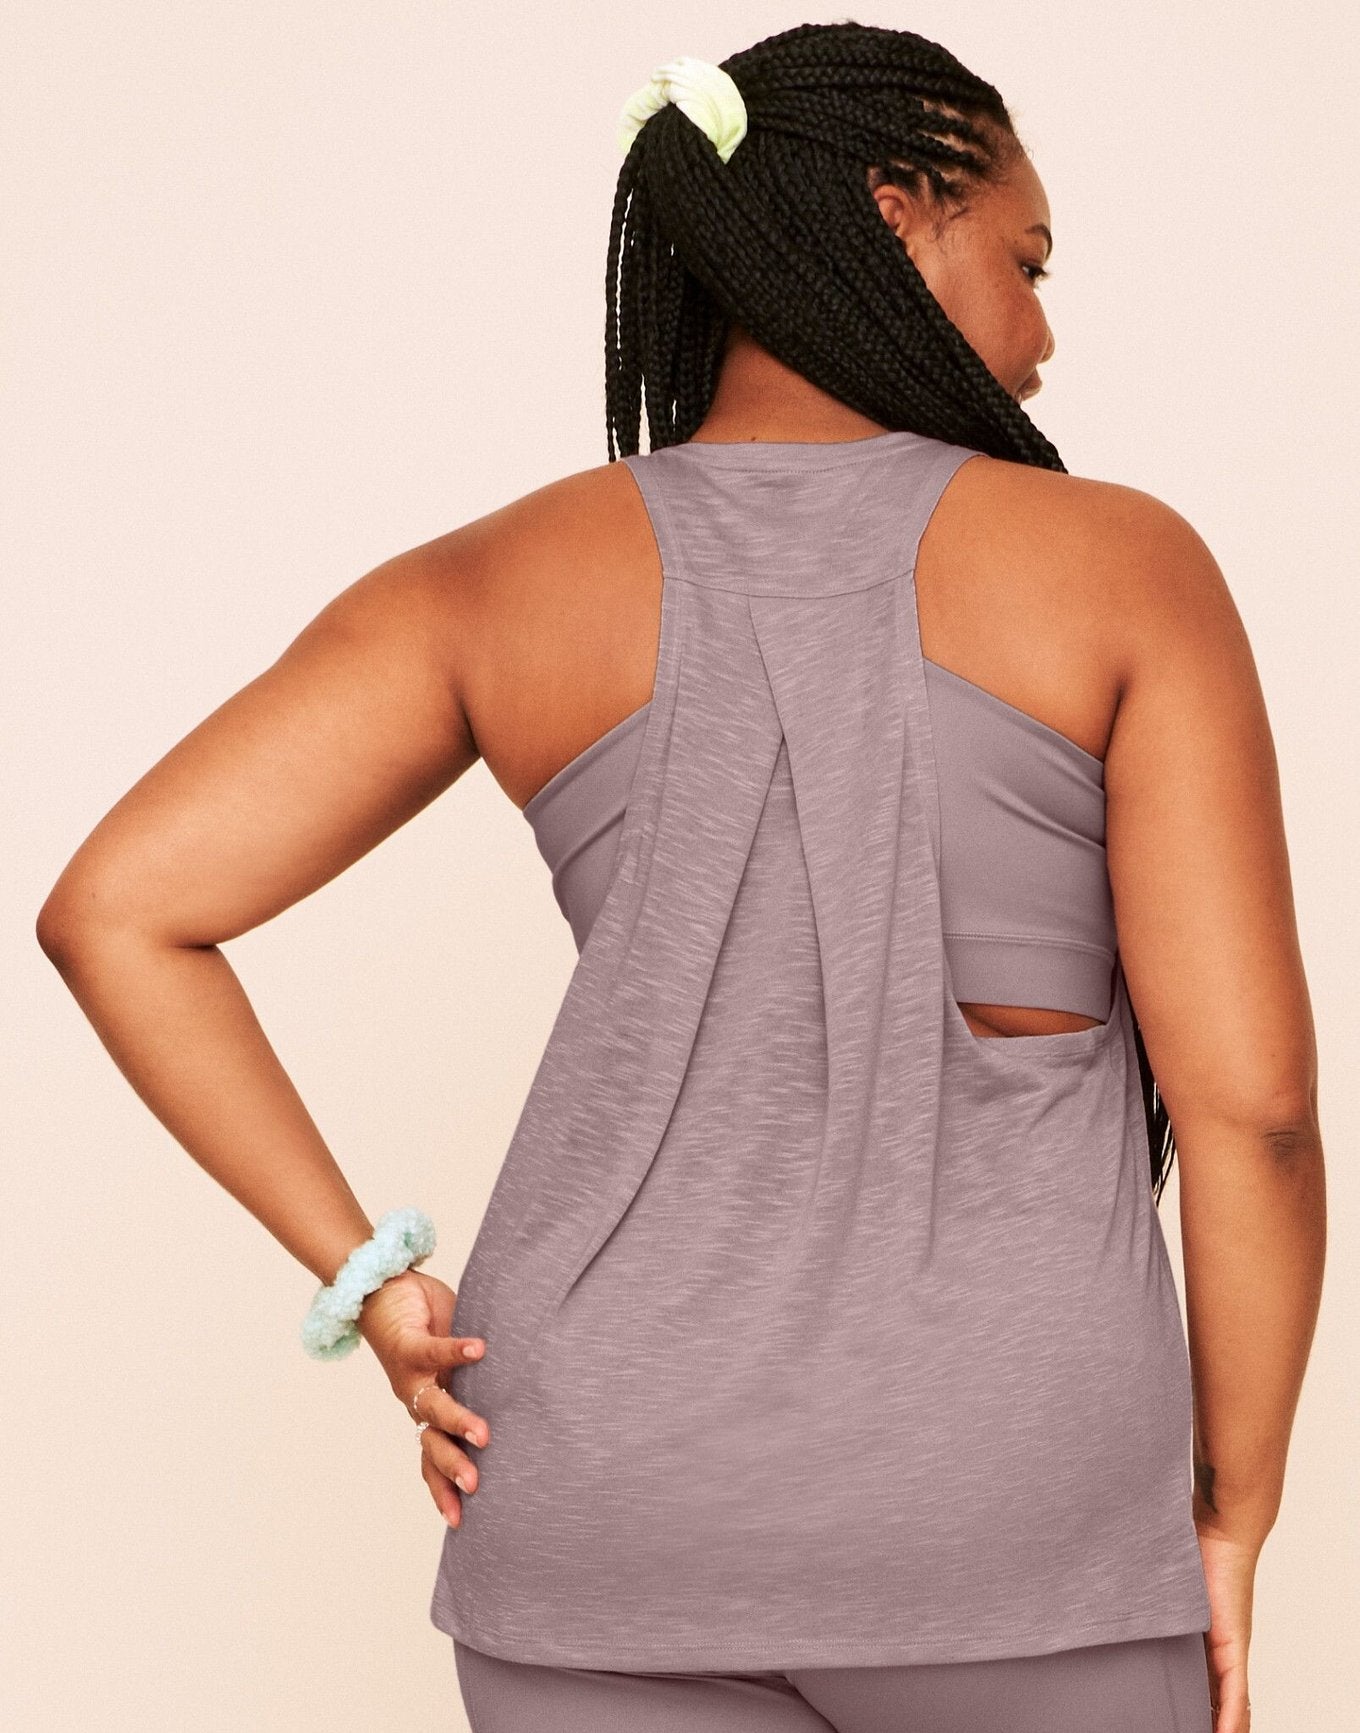 Earth Republic Emmaline Dropped Armhole Tank Workout Tank in color Deauville Mauve and shape tank